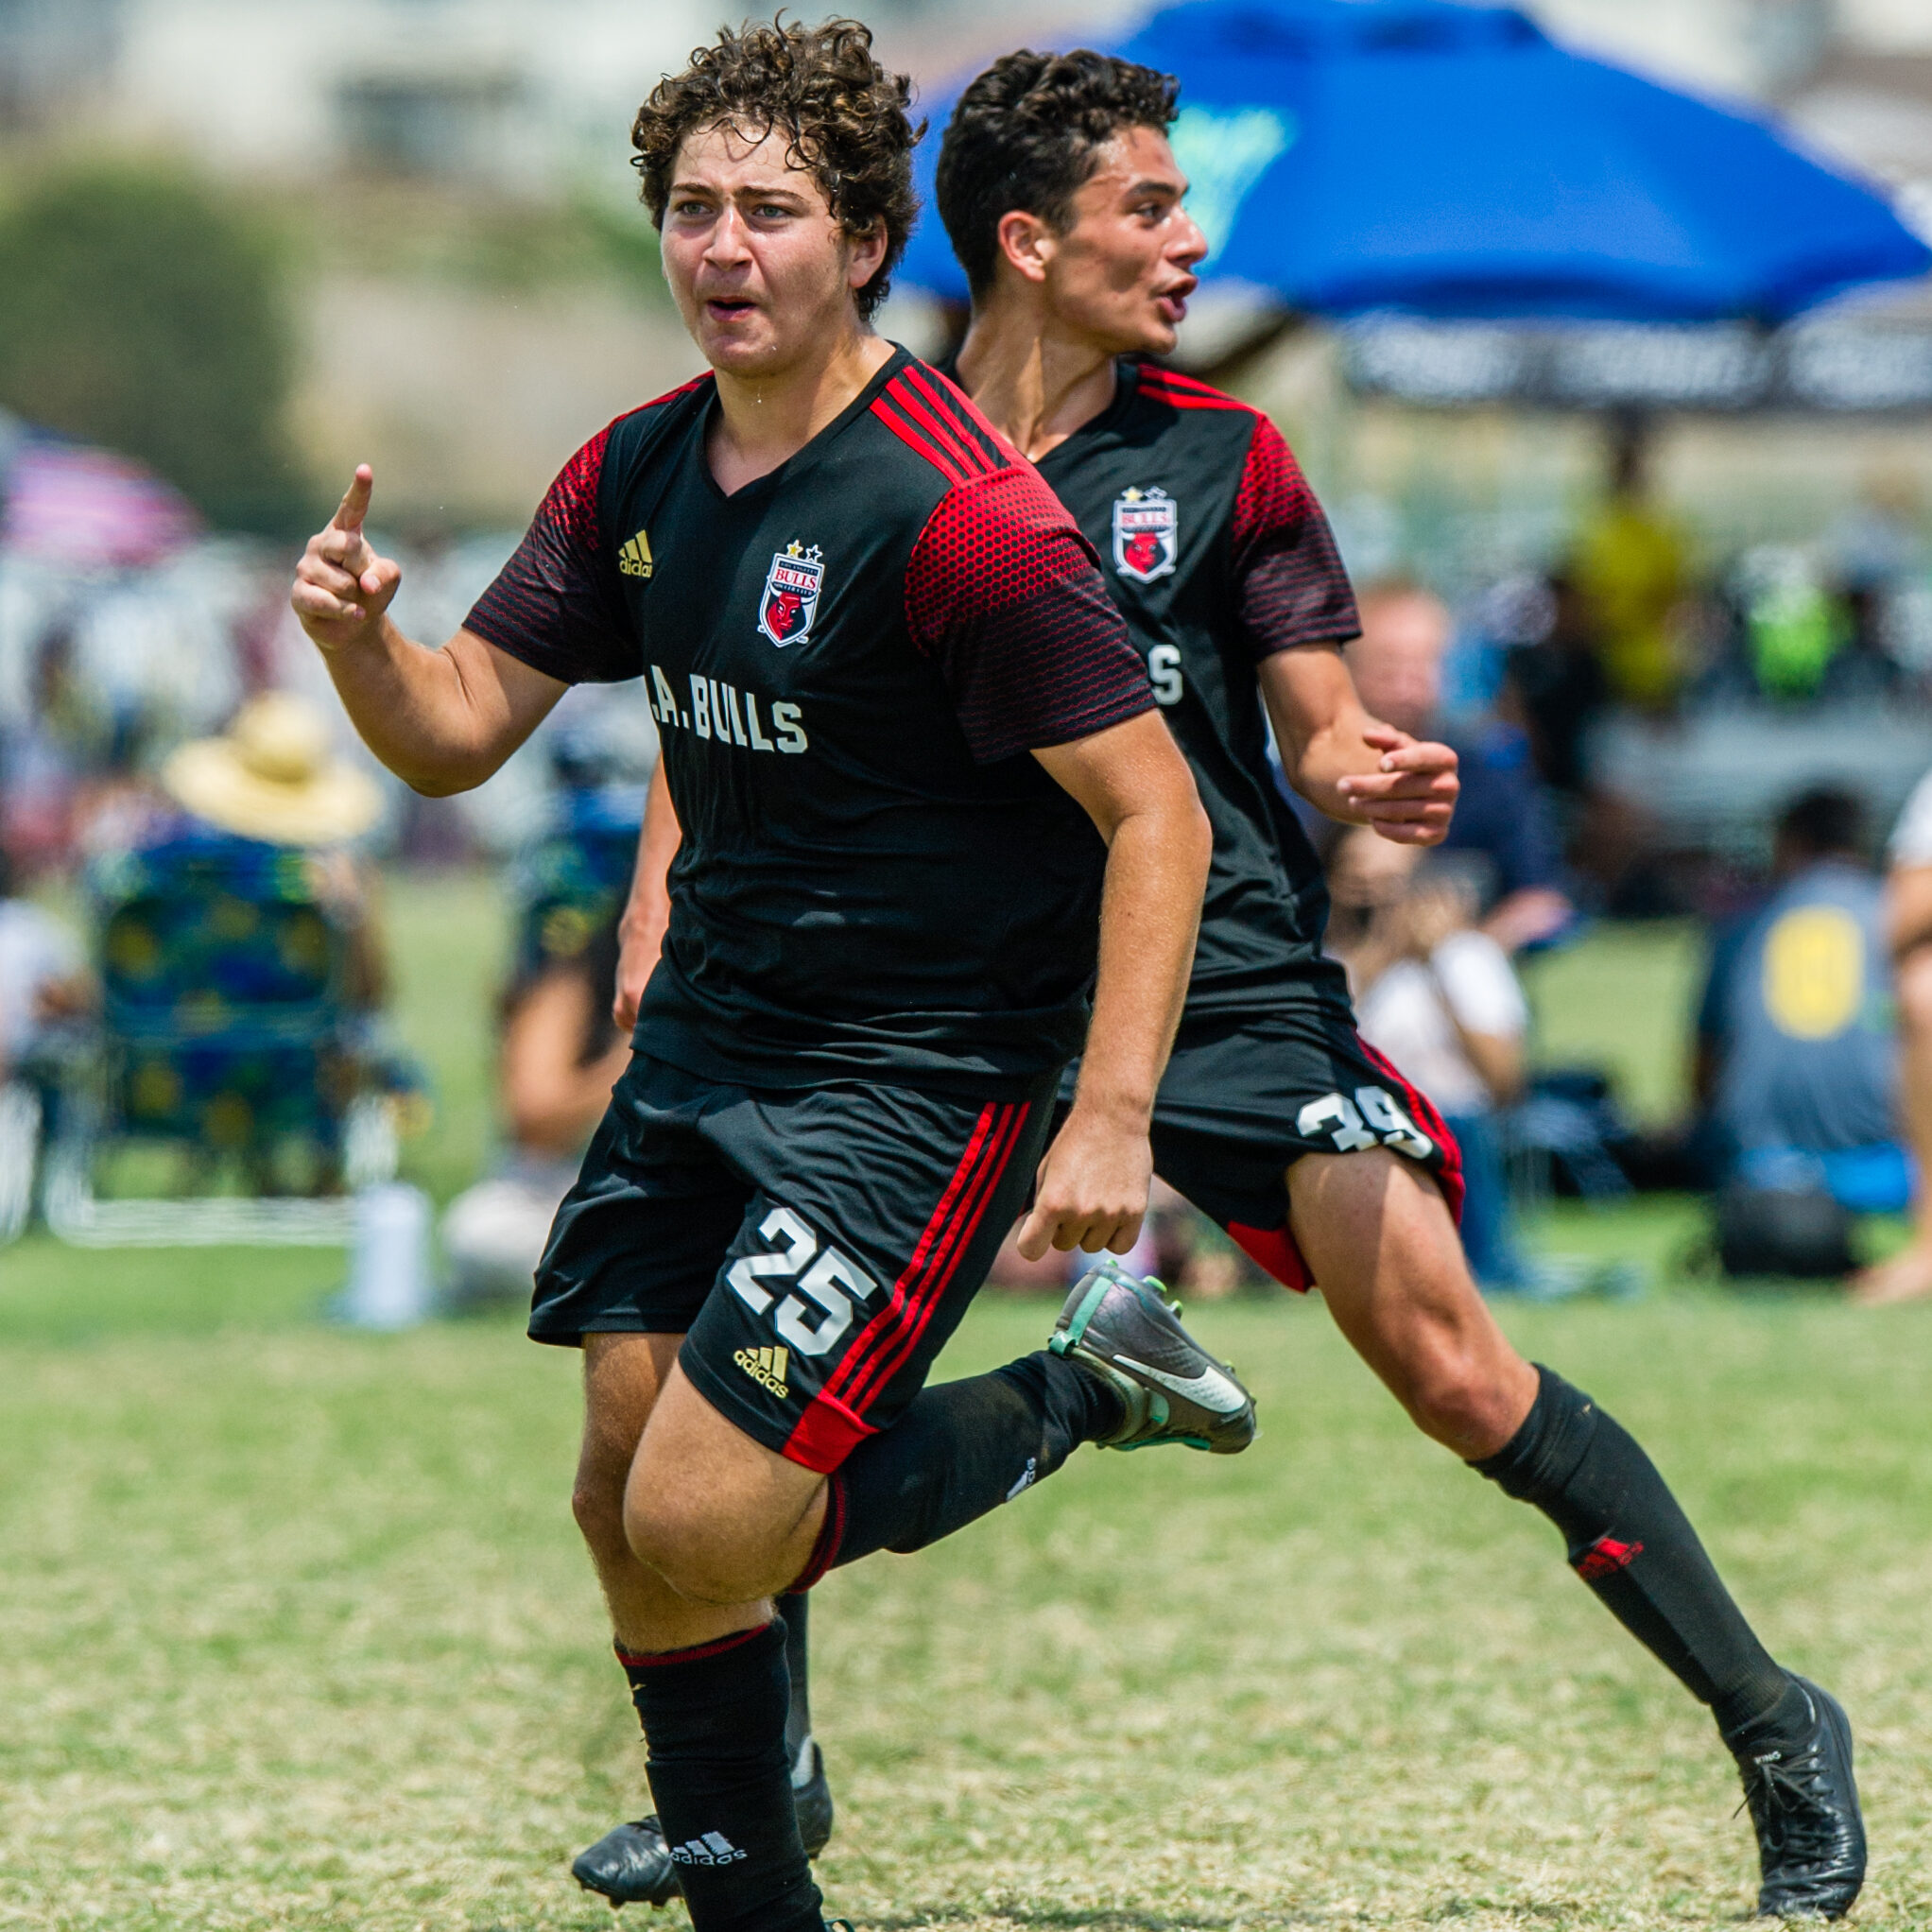 20210725 LA Bulls Surf Cup Days 2 and 3